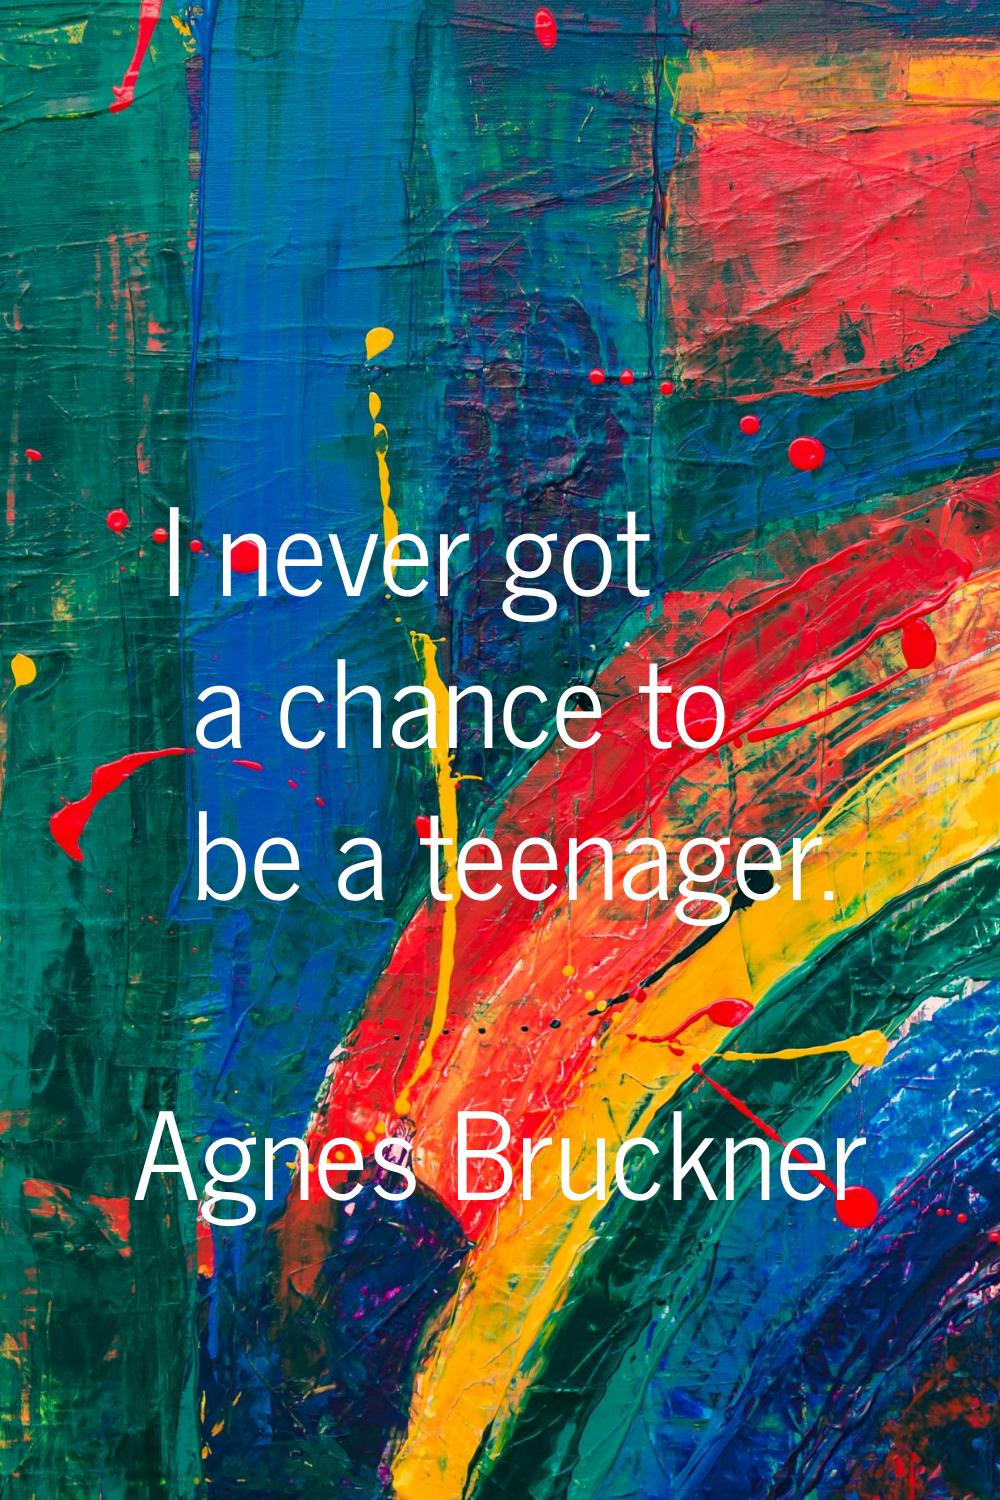 I never got a chance to be a teenager.